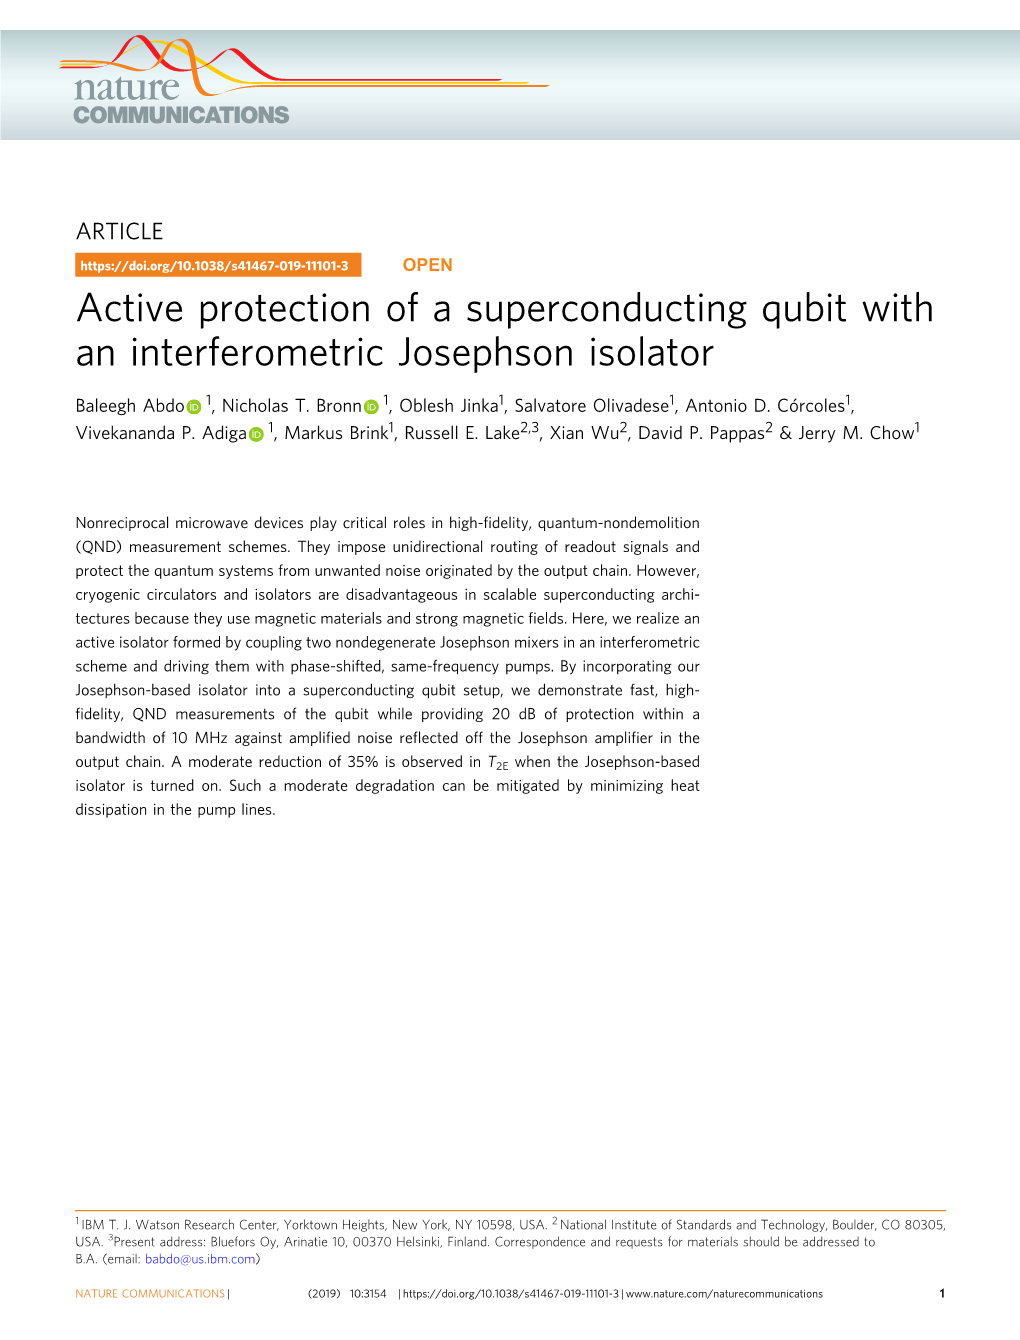 Active Protection of a Superconducting Qubit with an Interferometric Josephson Isolator